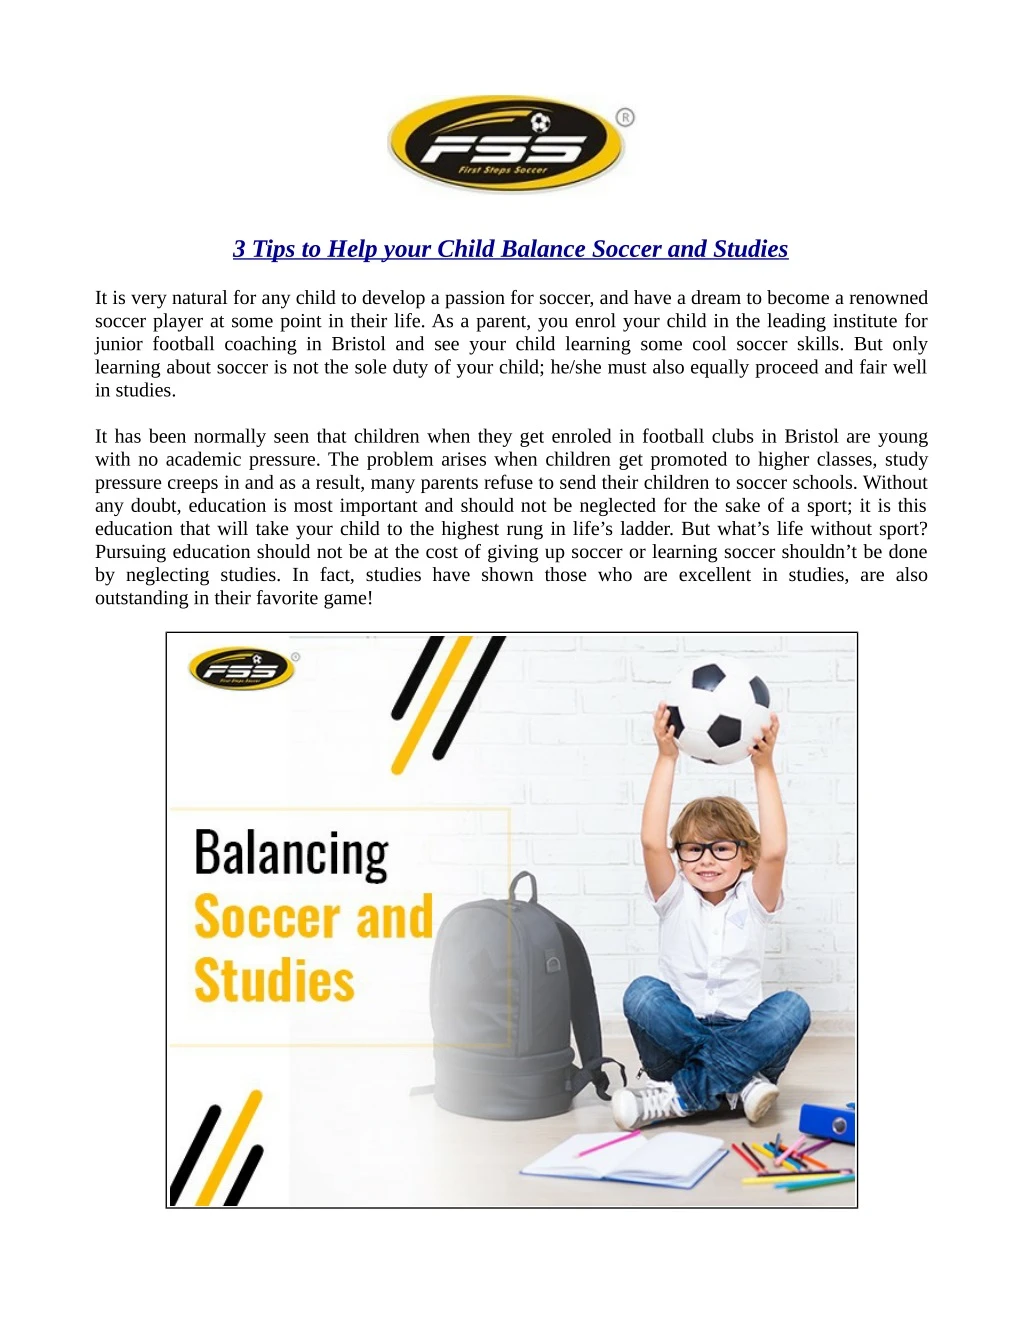 3 tips to help your child balance soccer